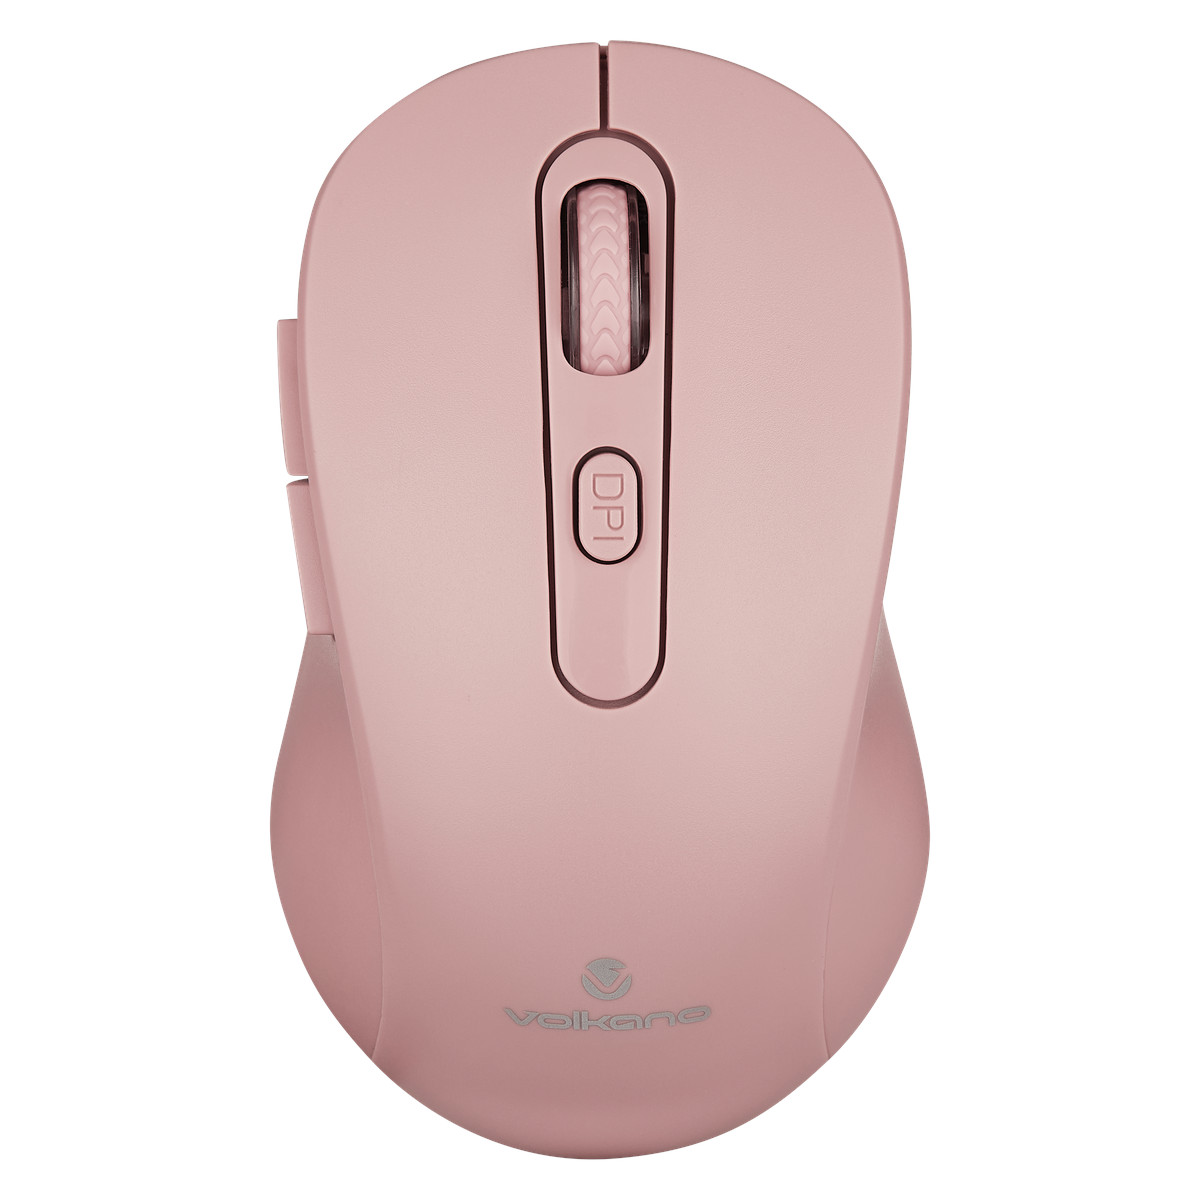 Volkano Sodium series 2.4Ghz Wireless Mouse (Pink)